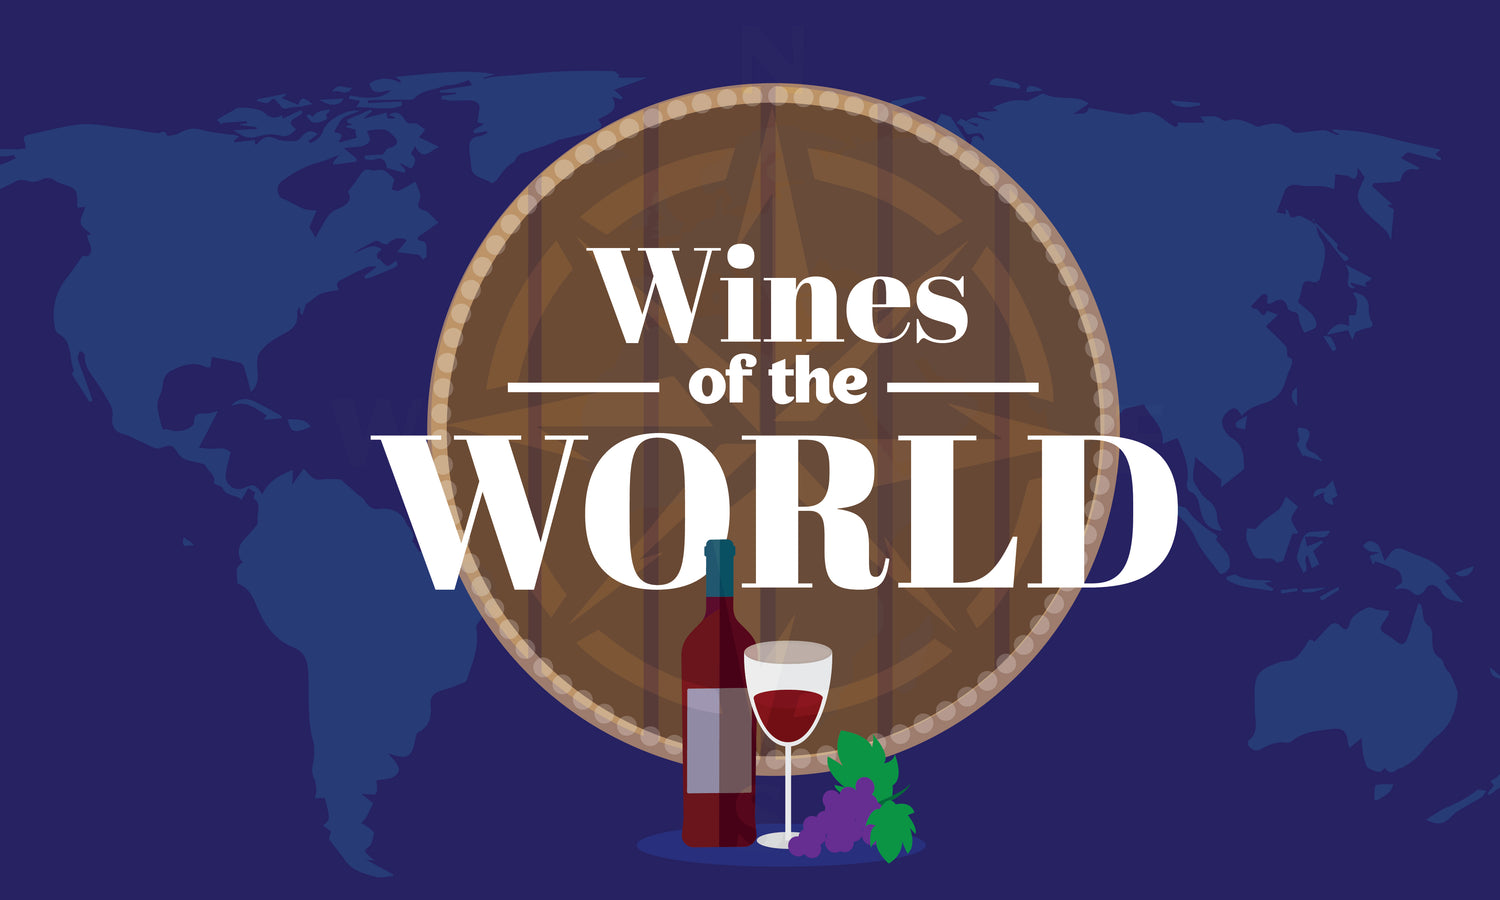 Wines of the World by WineryPH